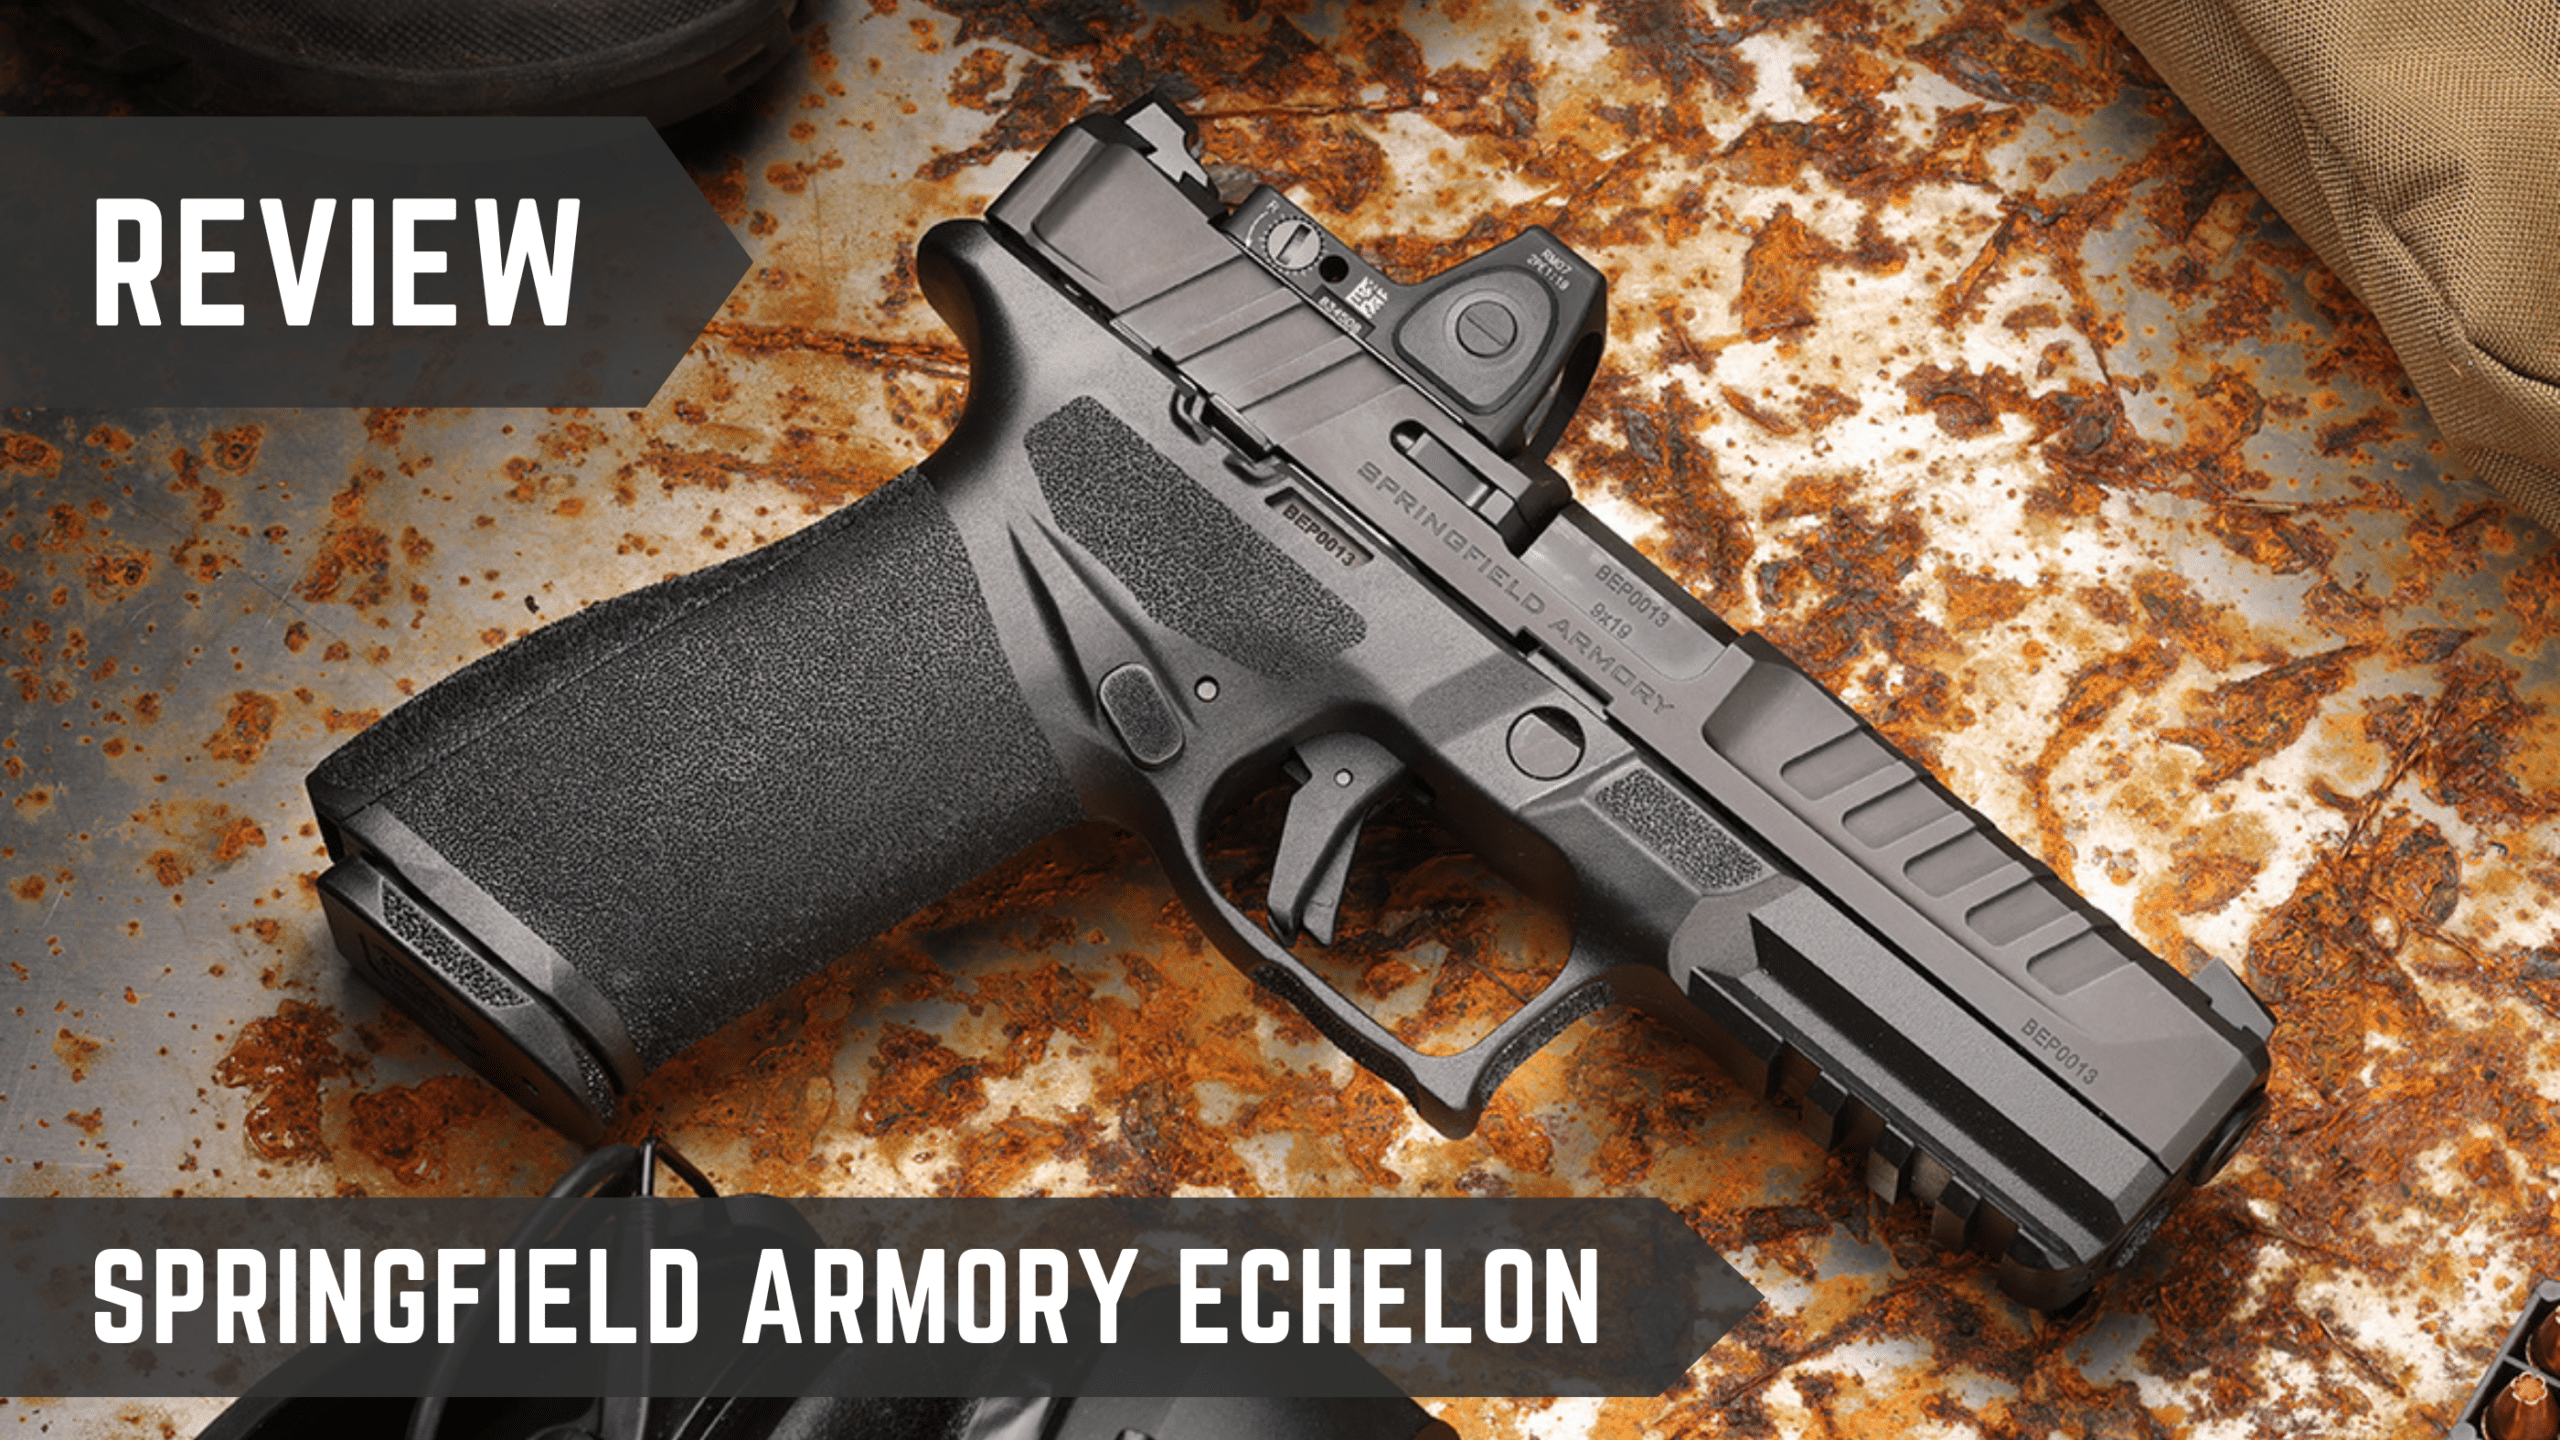 The Springfield Armory Echelon is a new offering in a packed field with unique innovations that aim to set this 9mm pistol apart from the crowd.